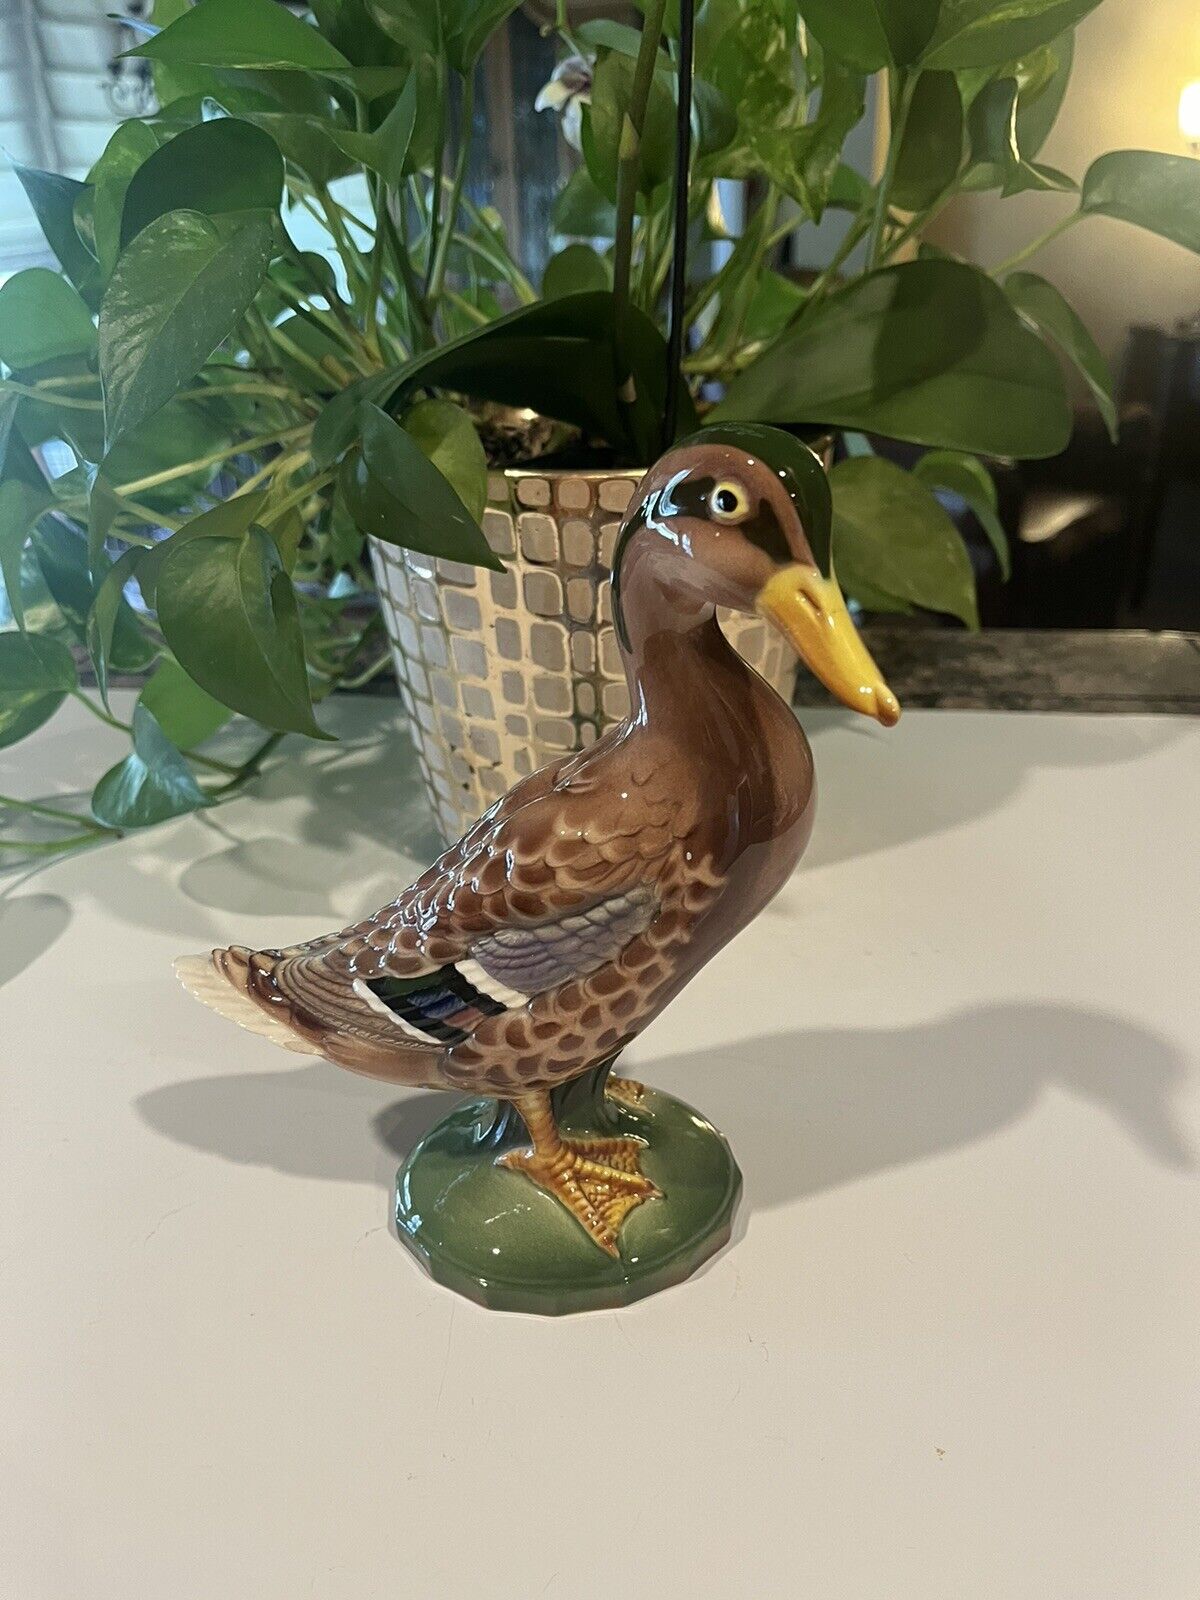 Vintage Ball Brothers Art Ware Duck Figurine Possible Made In 1940